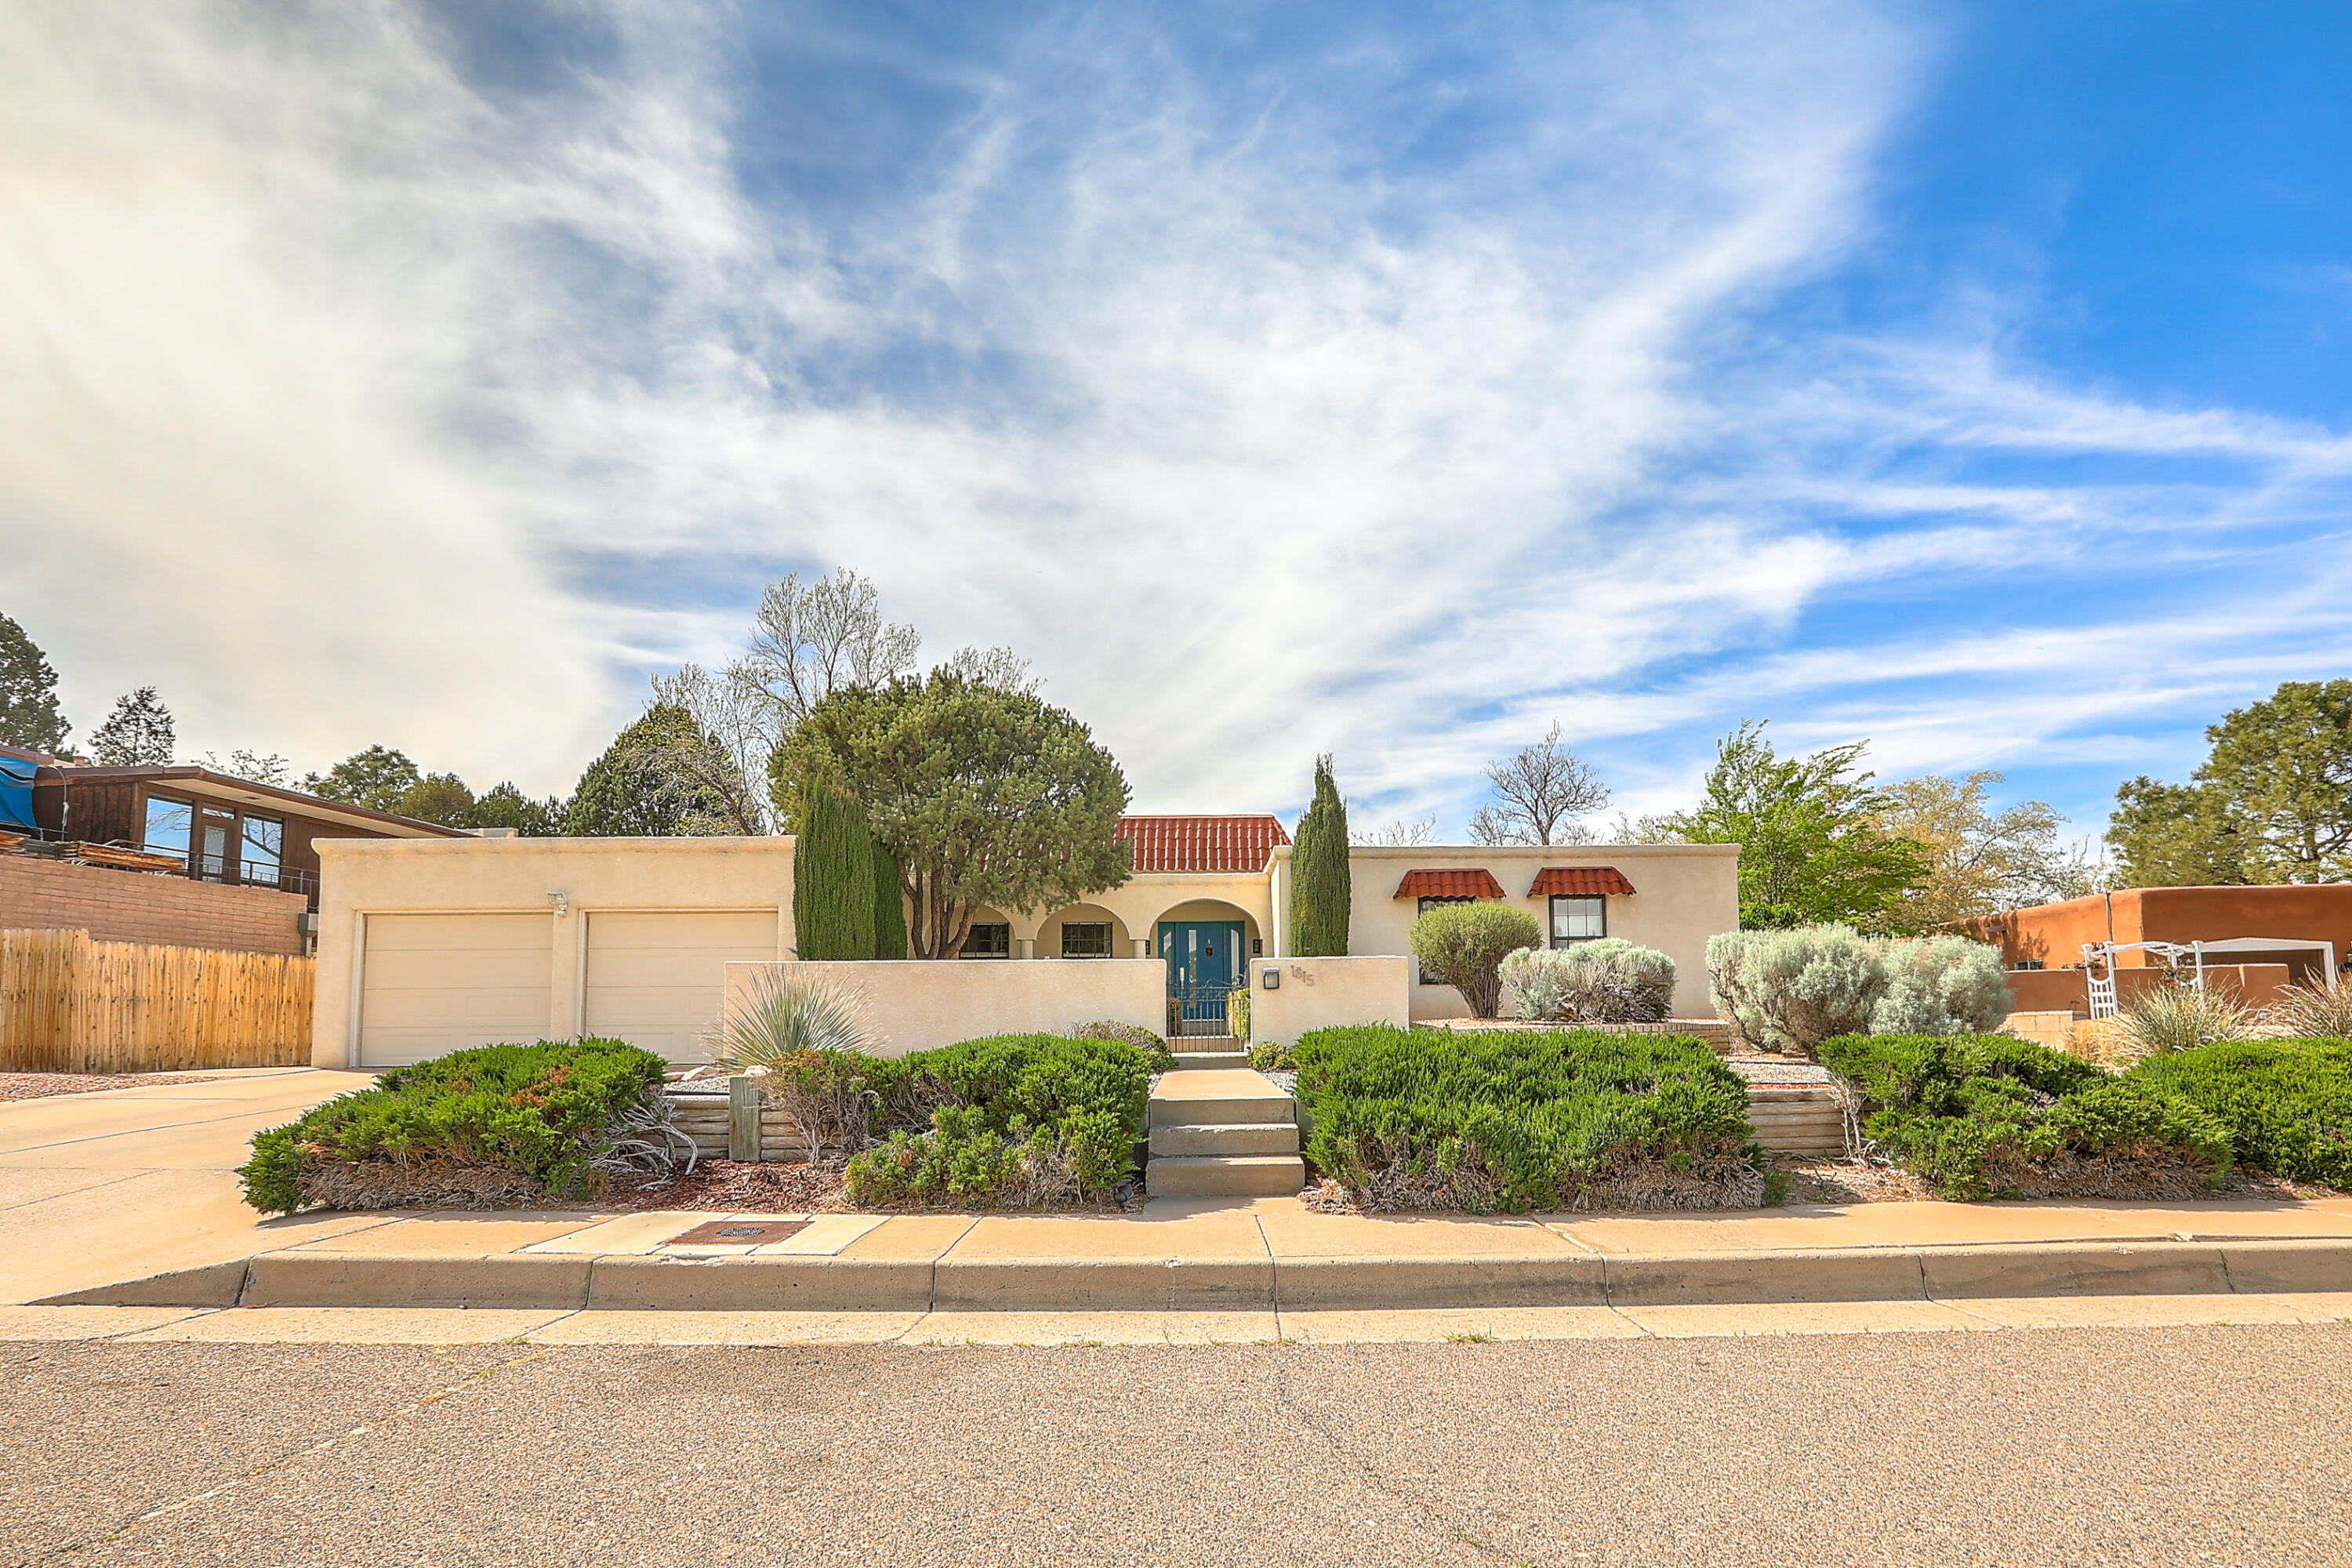 Stunning single story on quiet cul-de-sac in sought after UNM area & remodeled in 2019. Great Flr Plan w/foyer, two separate living areas, one w/gas log f/p w/ stacked stone floor to ceiling. Redesigned gourmet kitchen open to lg family dining area. Beautiful quartz island w/seating, built-in gas cooktop w/stainless hood, newer cabinets w/custom inserts, quartz counters, tile backsplash & SS appliances. Butlers pantry boasts a wine refrigerator, cabinets w/quartz countertop, sink w/disposal & lots of counter space. Guest bath, desk area, pantry & laundry rm all updated. Owners suite expanded w/sitting area, spacious walk-in closet w/built-in drawers & vanity area.+ updated bath w/new cabinets, counters, lighted medicine cabinet mirrors, sep. shower & 2nd walk-in closet. See update list!!!